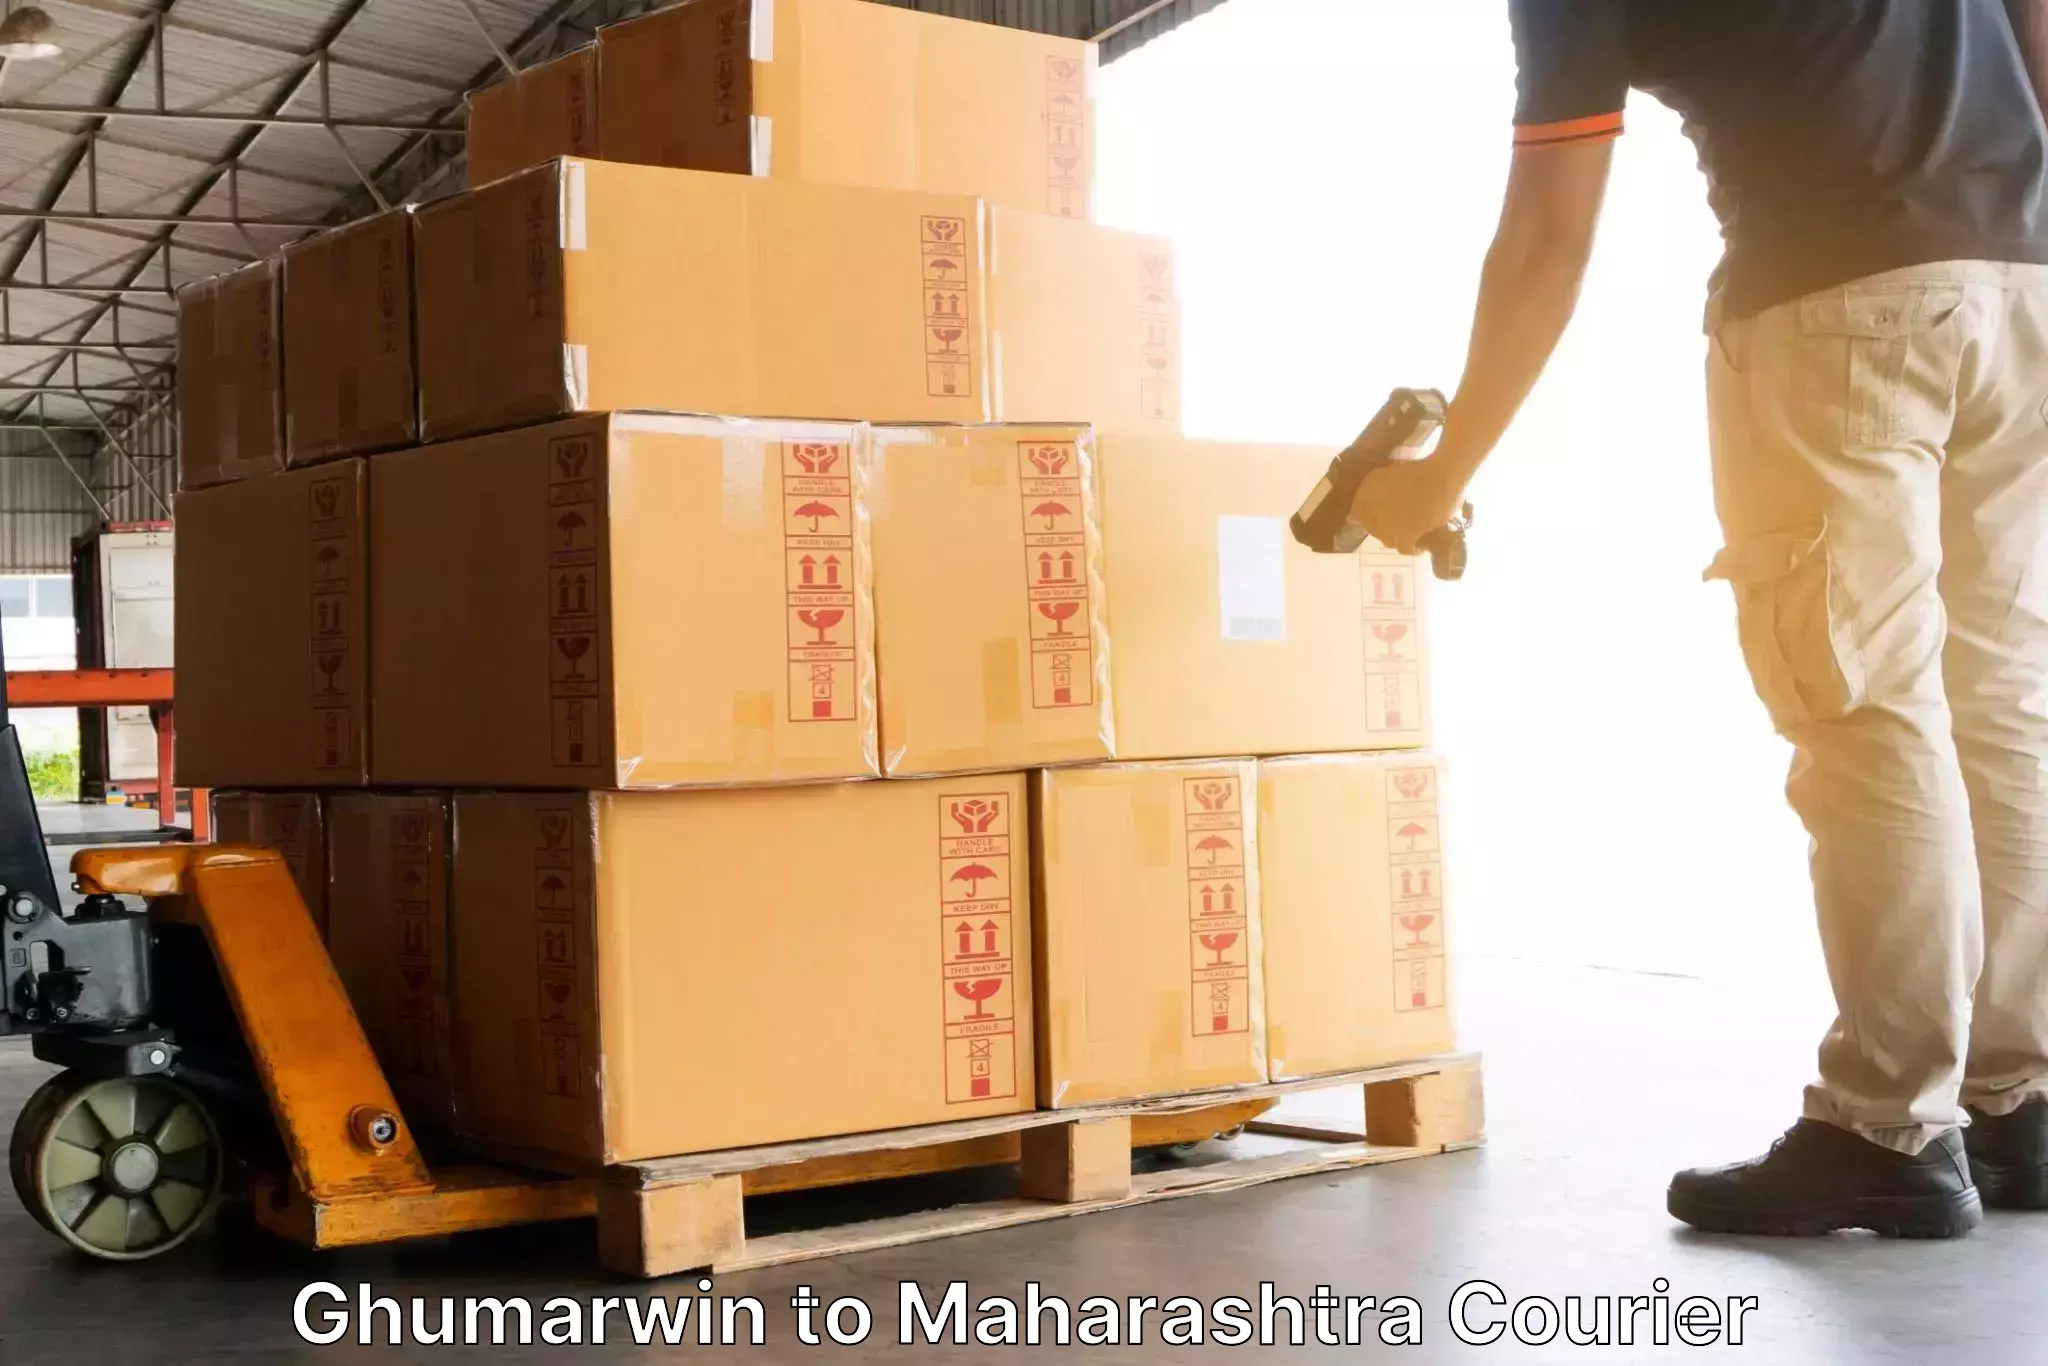 Flexible delivery scheduling in Ghumarwin to Sangli